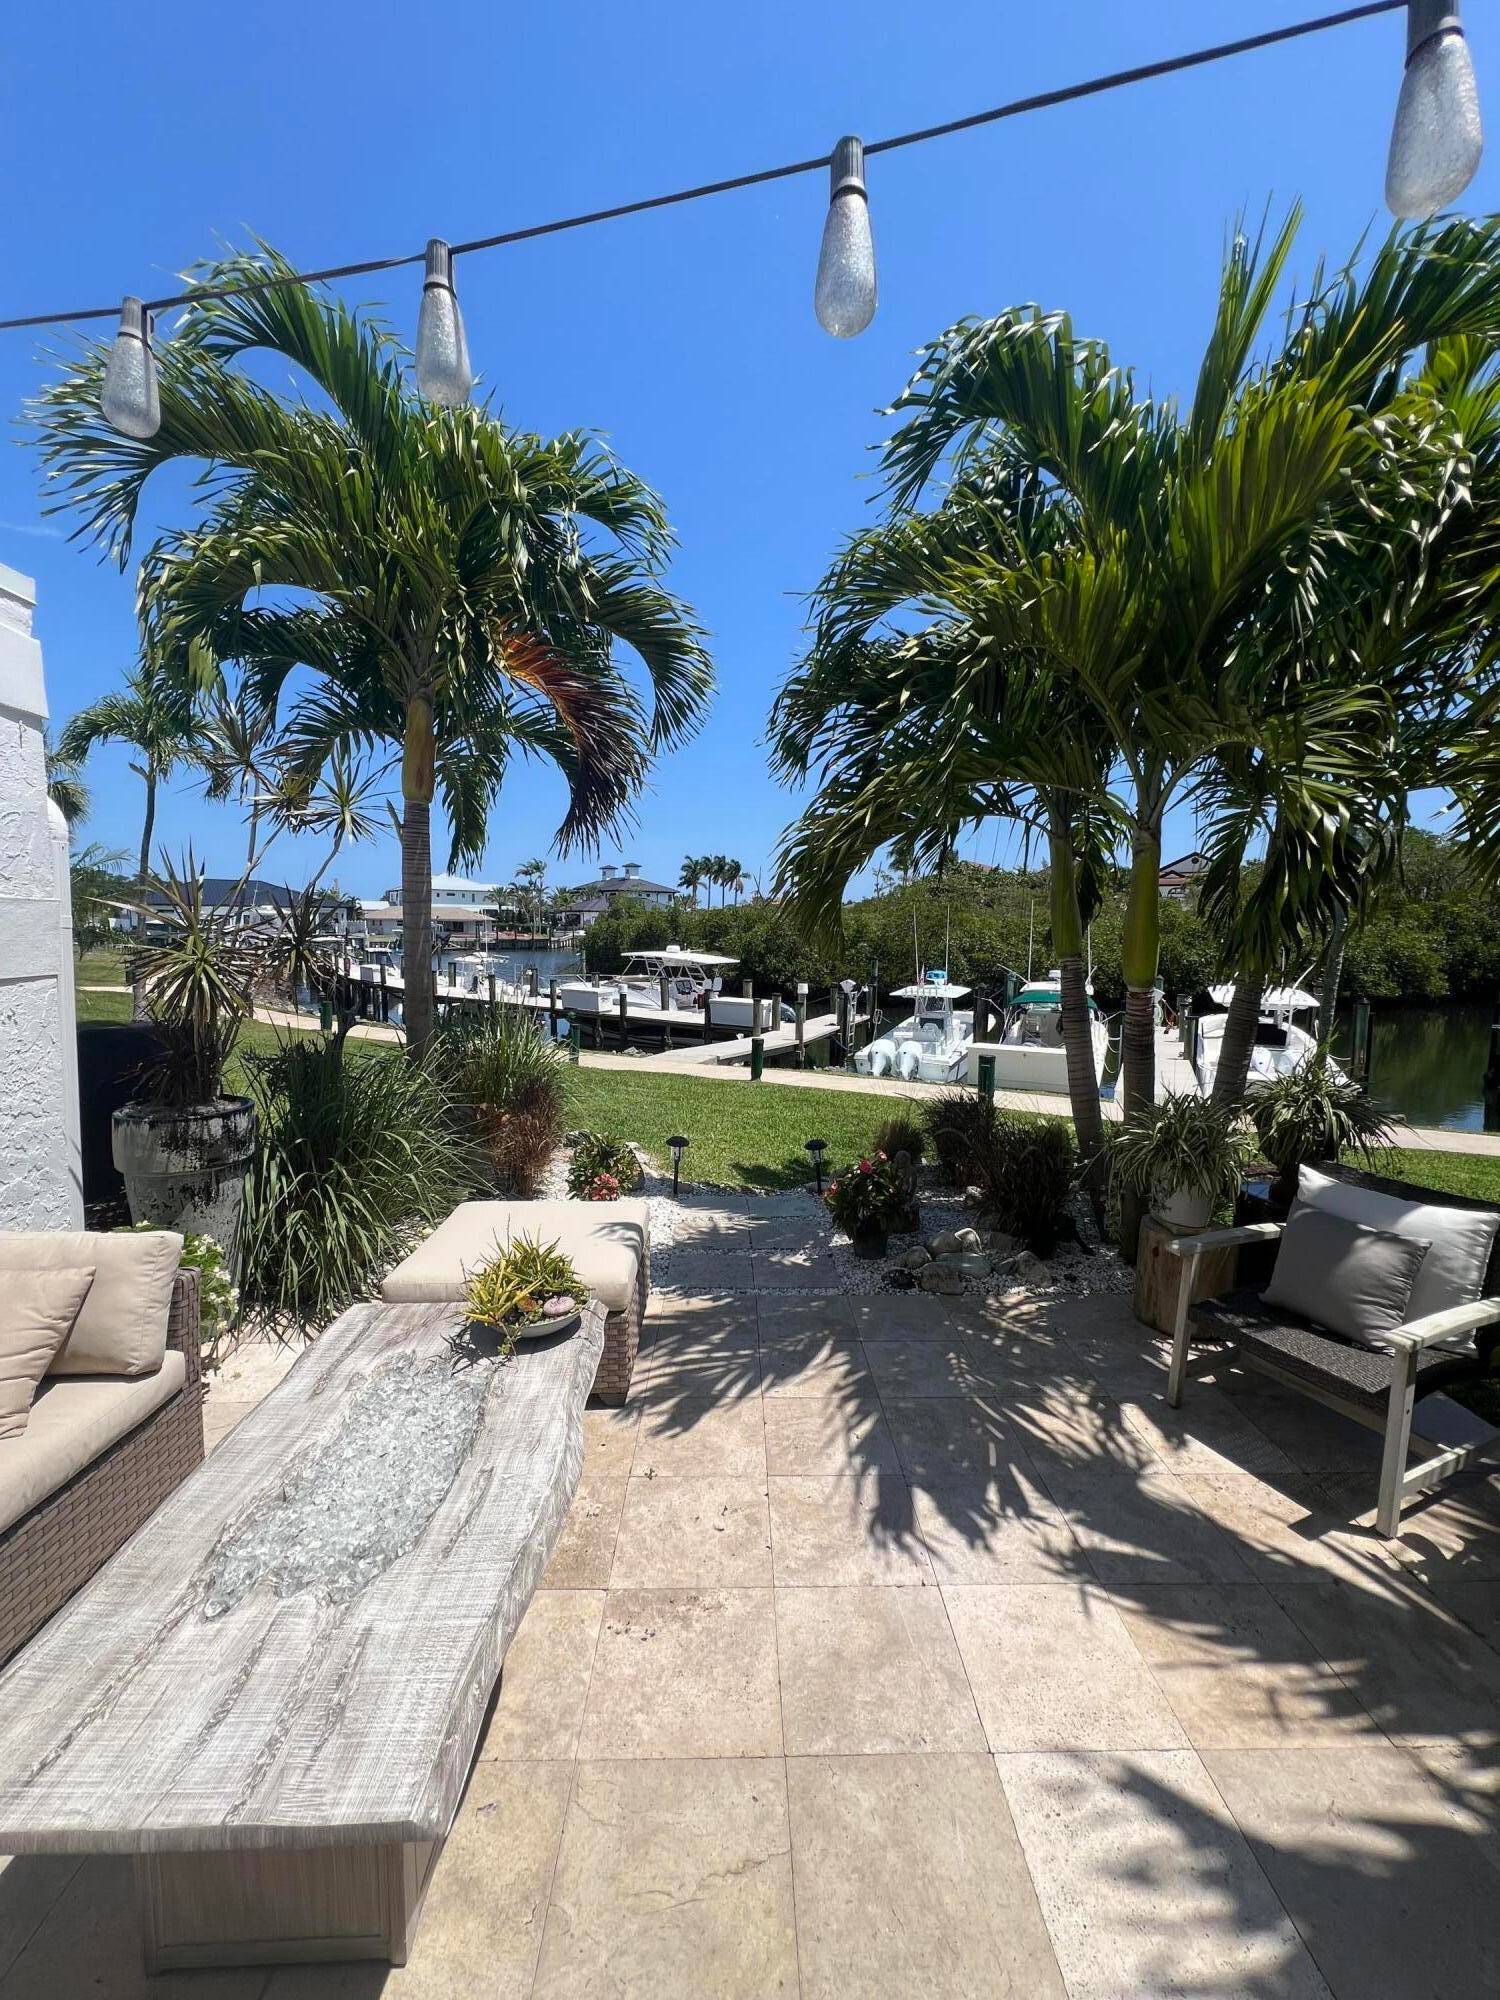 Turnkey seasonal rental available in a vibrant boating community on the Intracoastal Waterway !